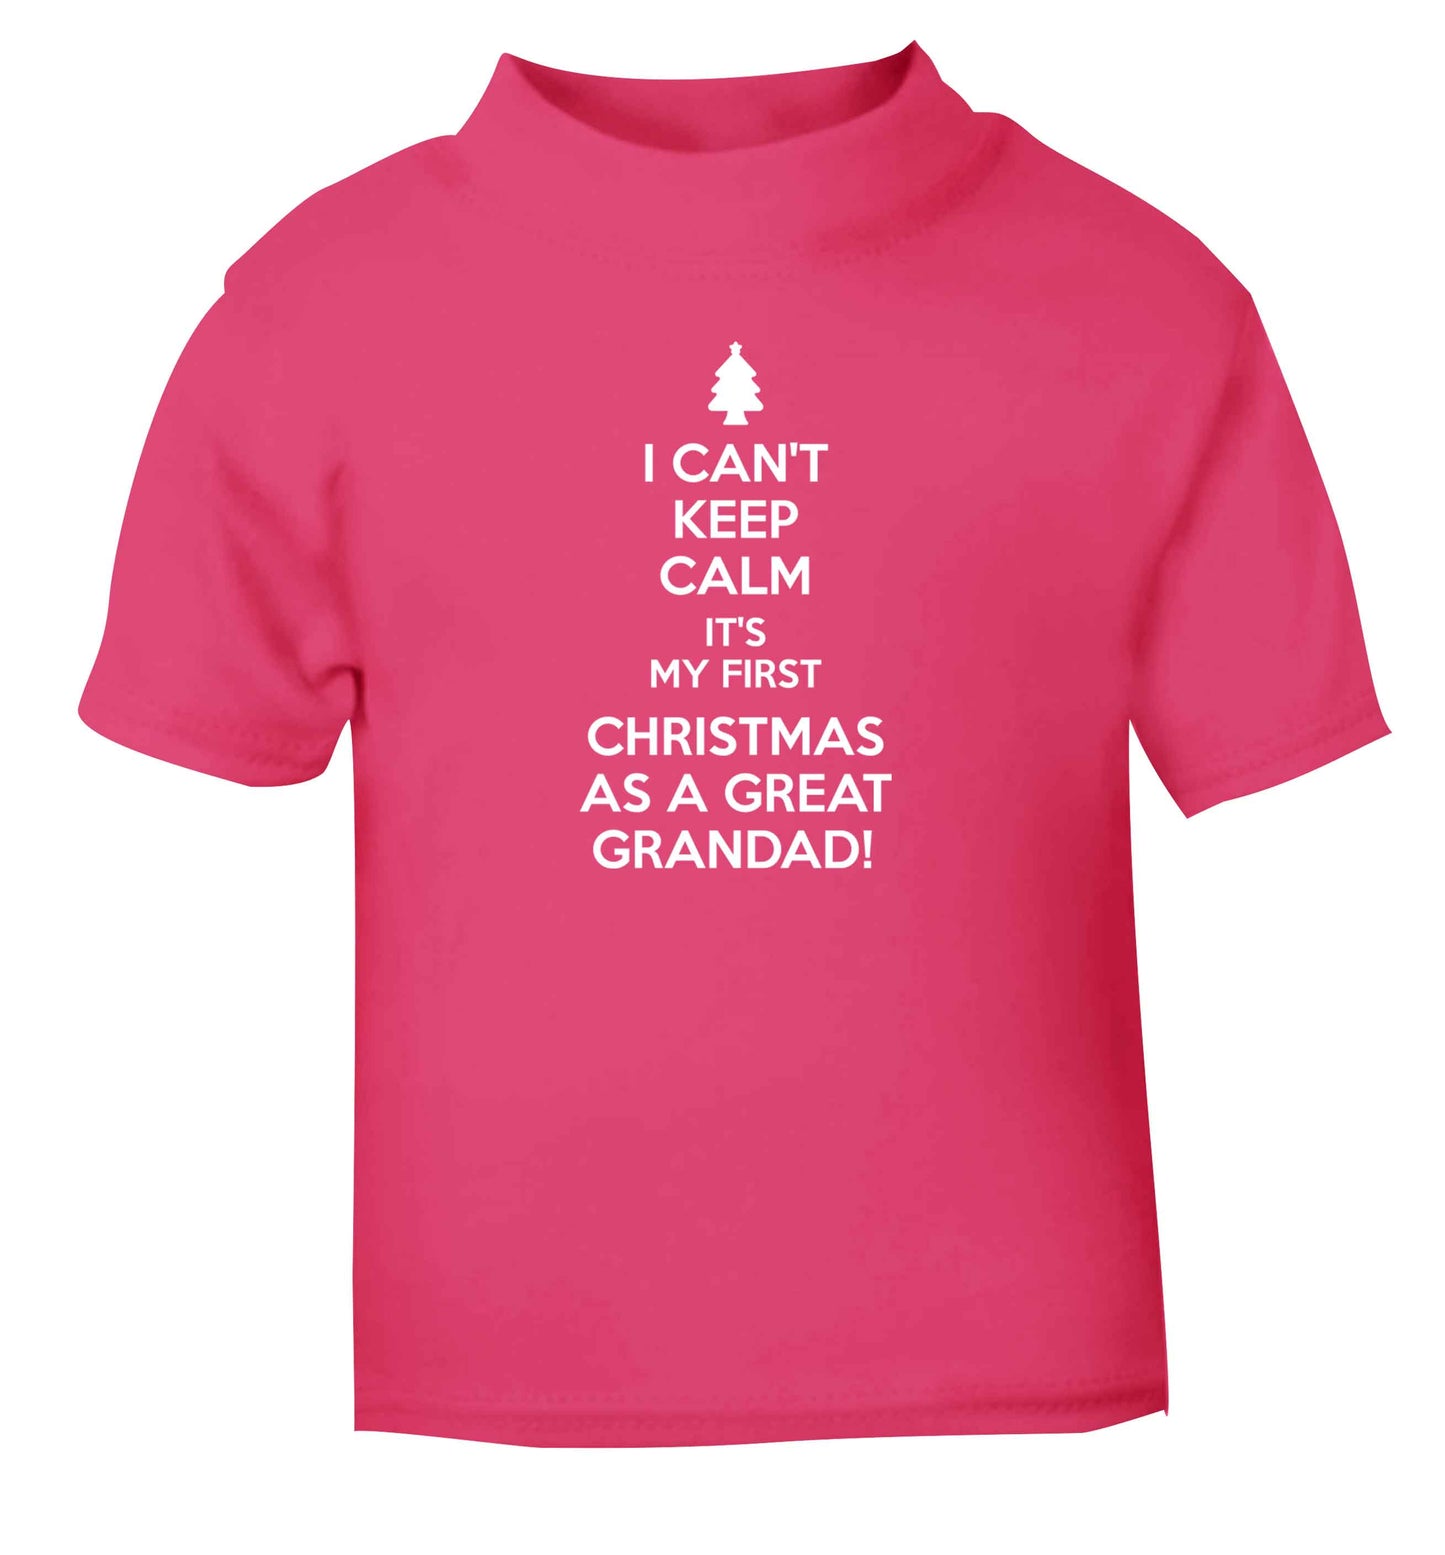 I can't keep calm it's my first Christmas as a great grandad! pink Baby Toddler Tshirt 2 Years